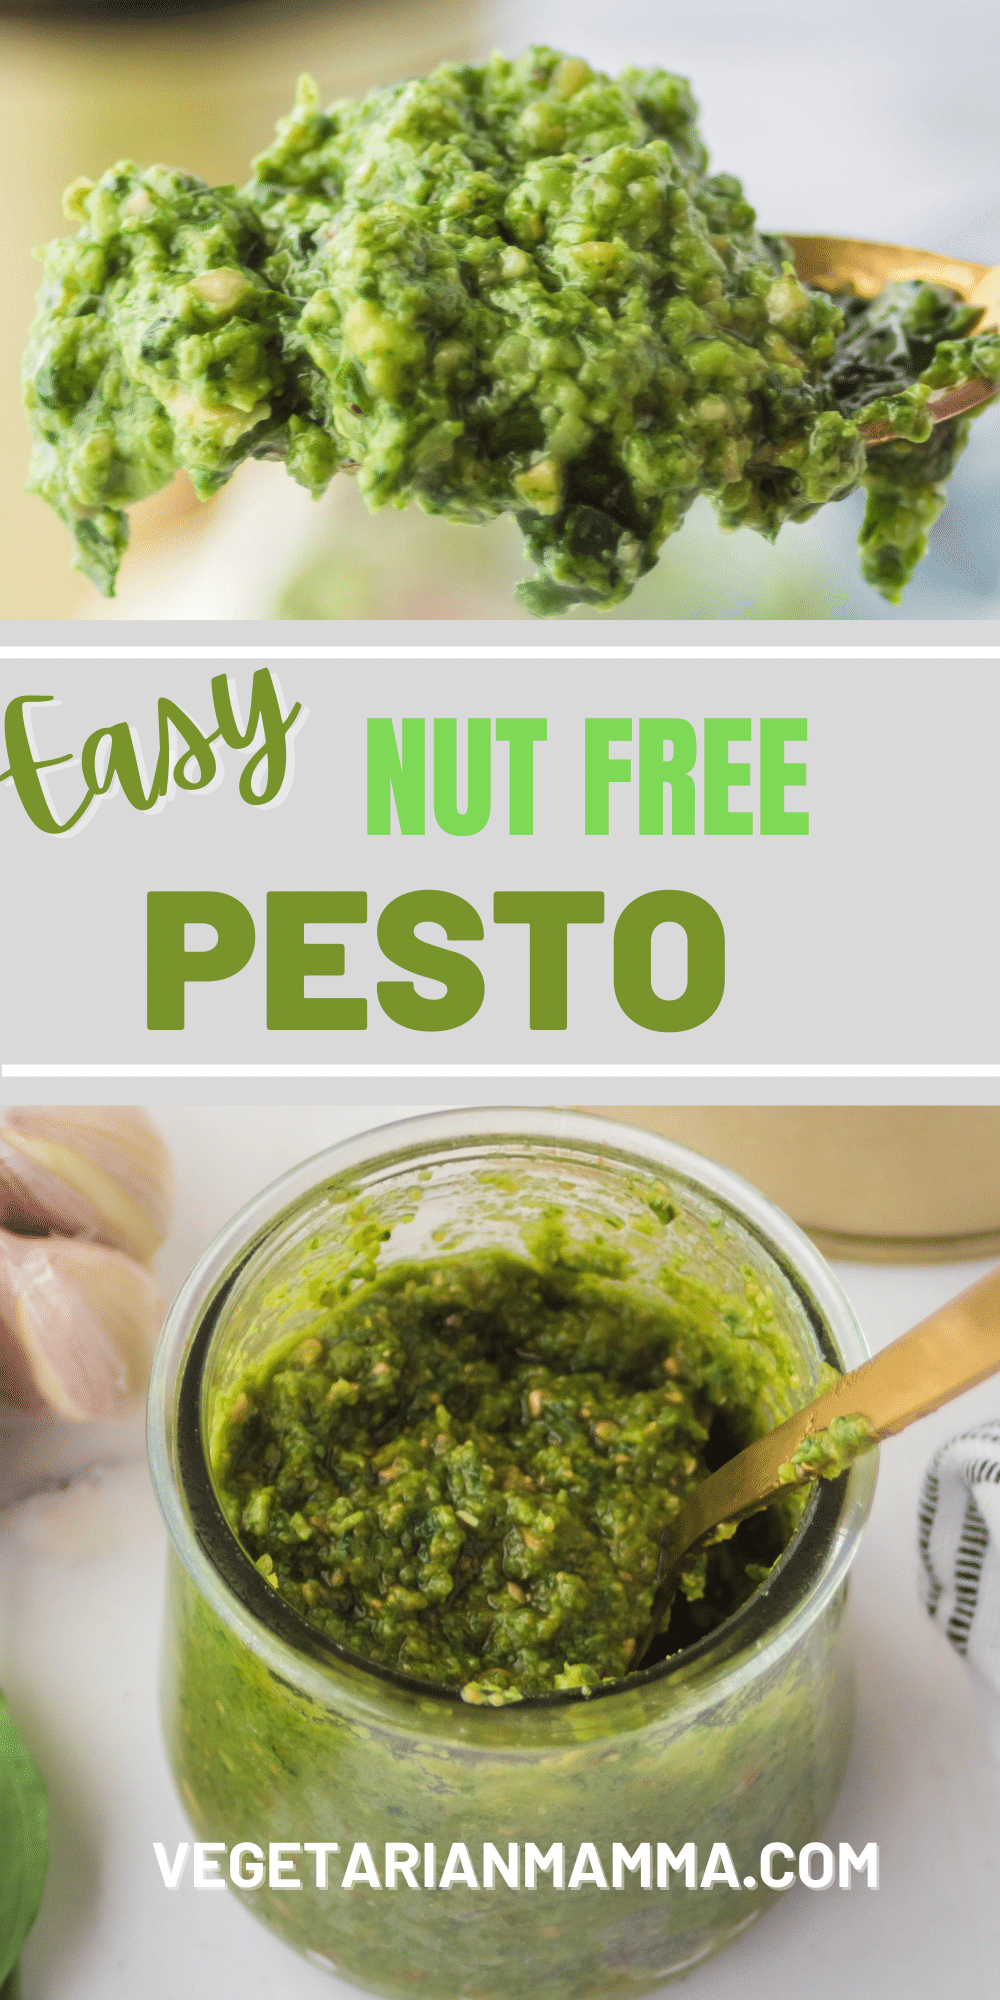 A delicious sauce made with fresh basil and garlic, typically pesto involves nuts, but not this one! Nut Free pesto is made with sunflower seeds to make it allergy friendly, but still delicious. #pesto #allergyfriendly